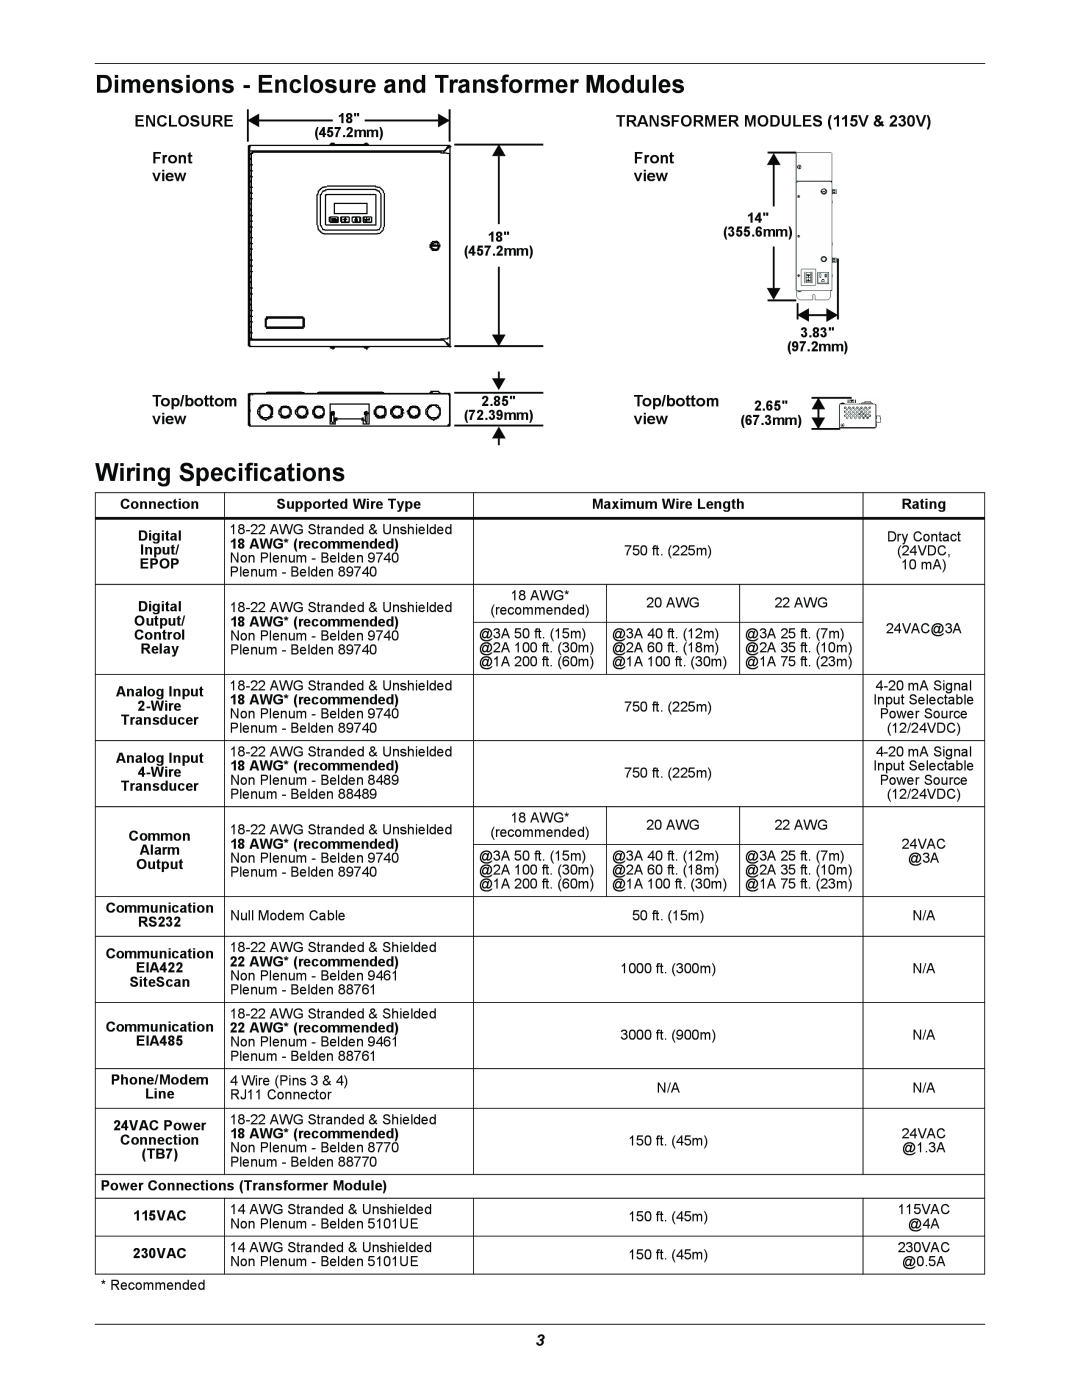 Liebert AC8 manual Dimensions - Enclosure and Transformer Modules, Wiring Specifications, ENCLOSURE Front view, Top/bottom 